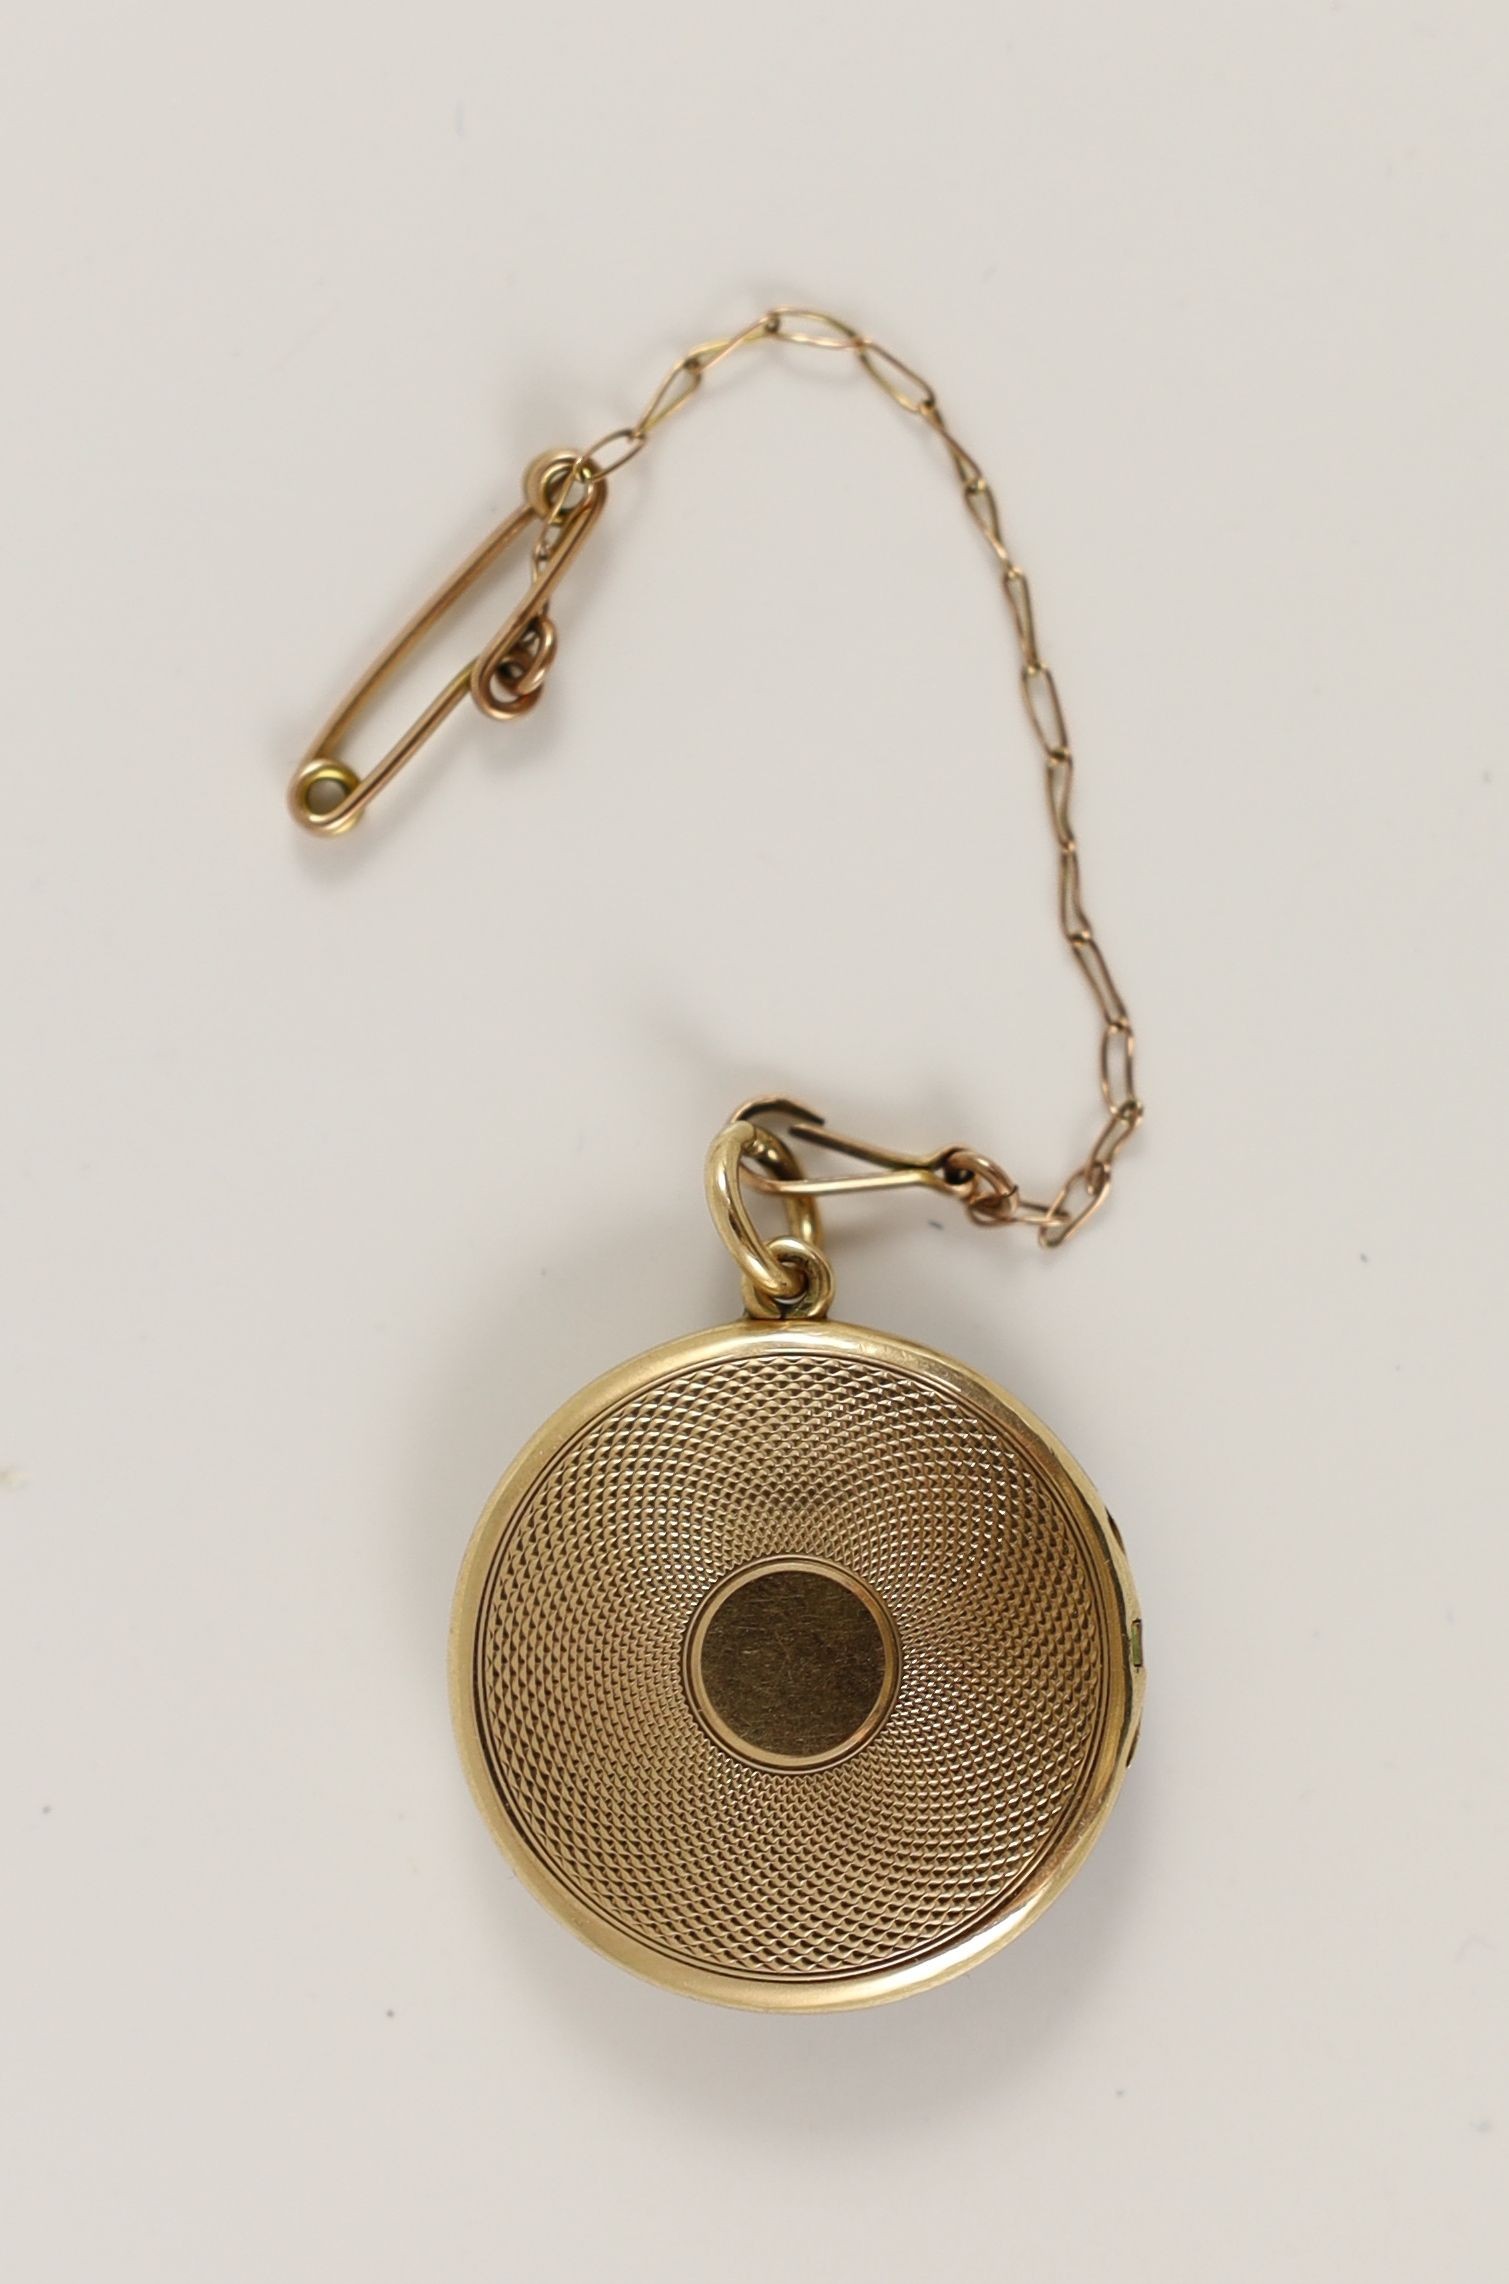 An Edwardian engine turned gold, blue guilloche enamel with gilded scrolls and diamond set circular pendant locket